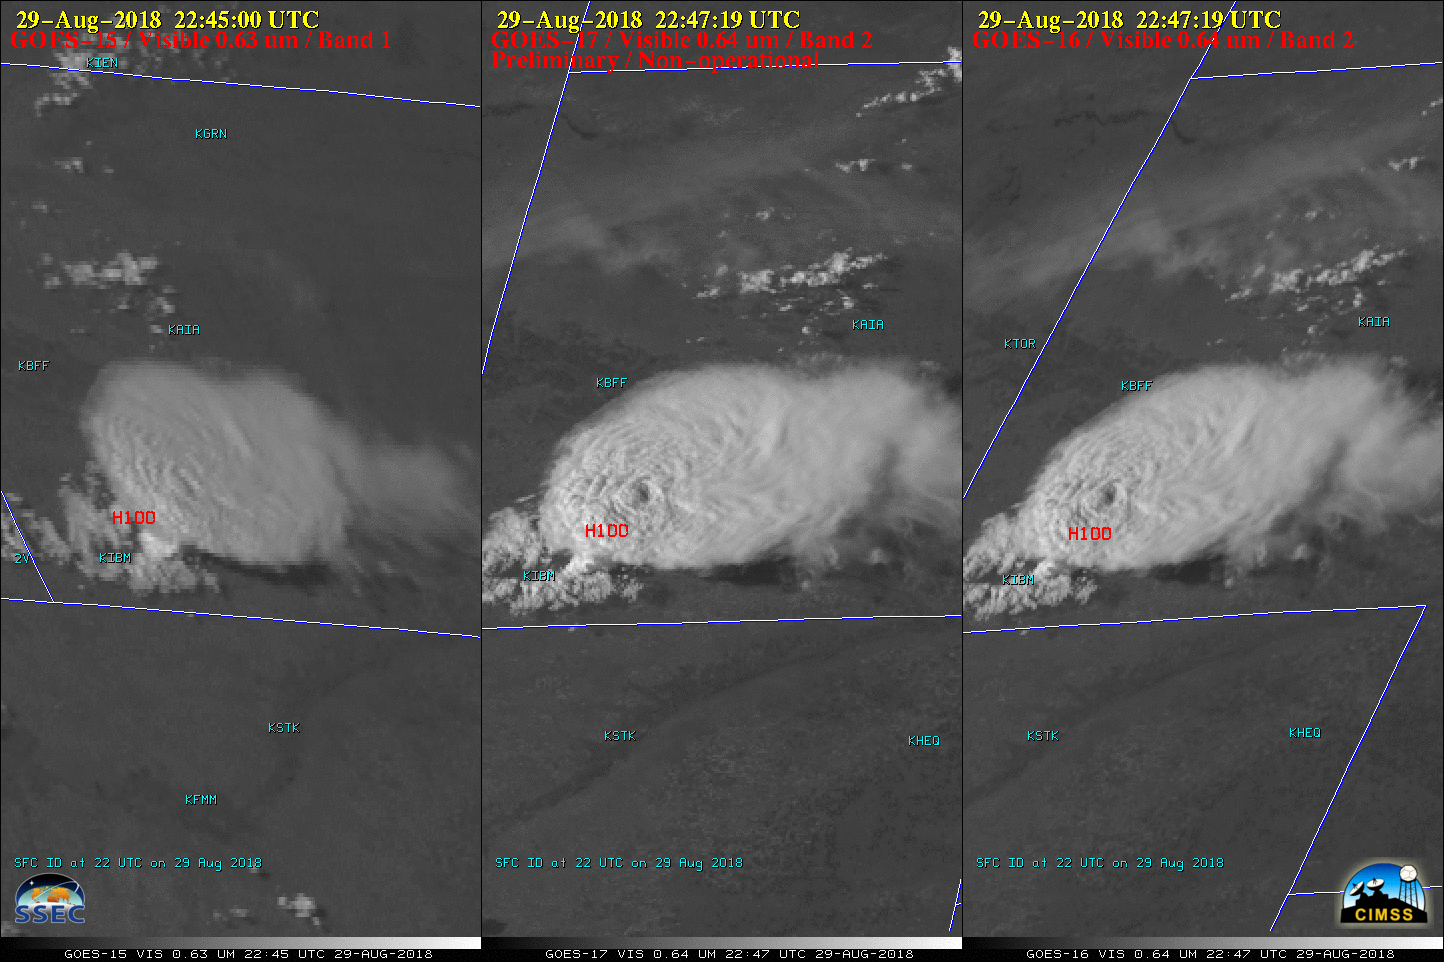 Visible images from GOES-15 (0.63 µm, left), GOES-17 (0.64 µm, center) and GOES-16 (0.64 µm, right), with SPC storm reports plotted in red [click to play animation | MP4]